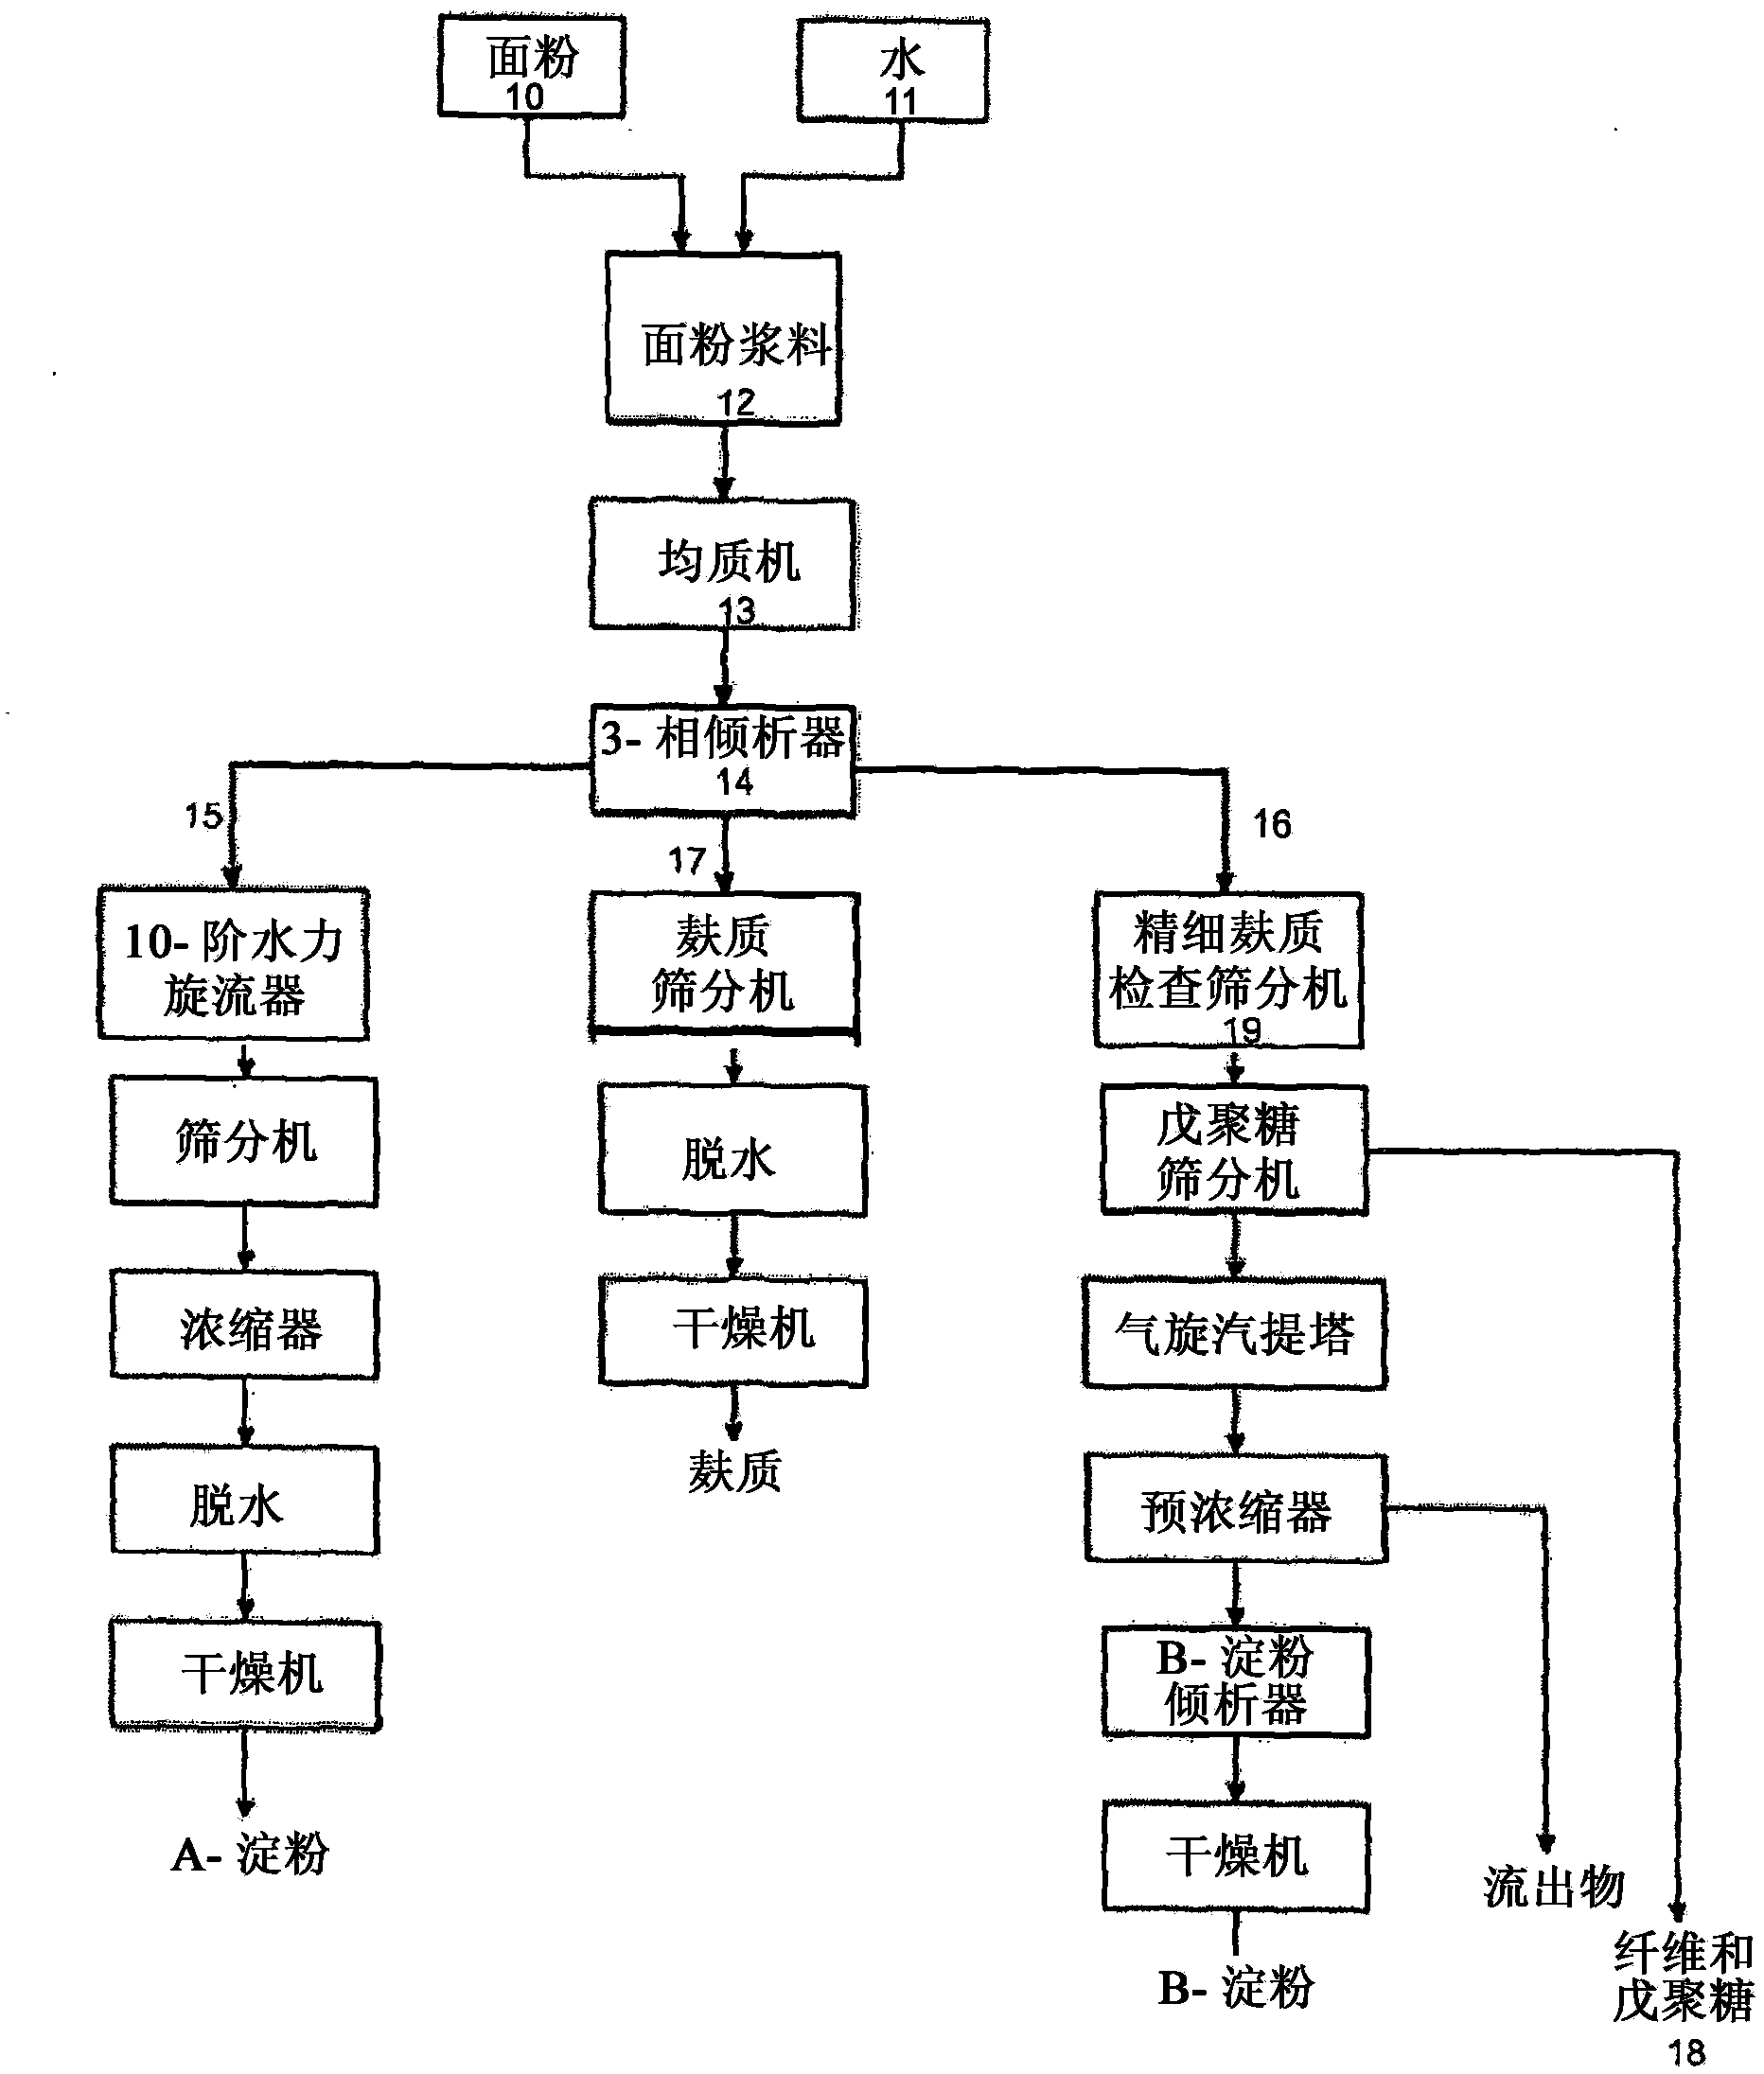 Method and apparatus for the production of an arabinoxylan-enriched preparation and other co-products